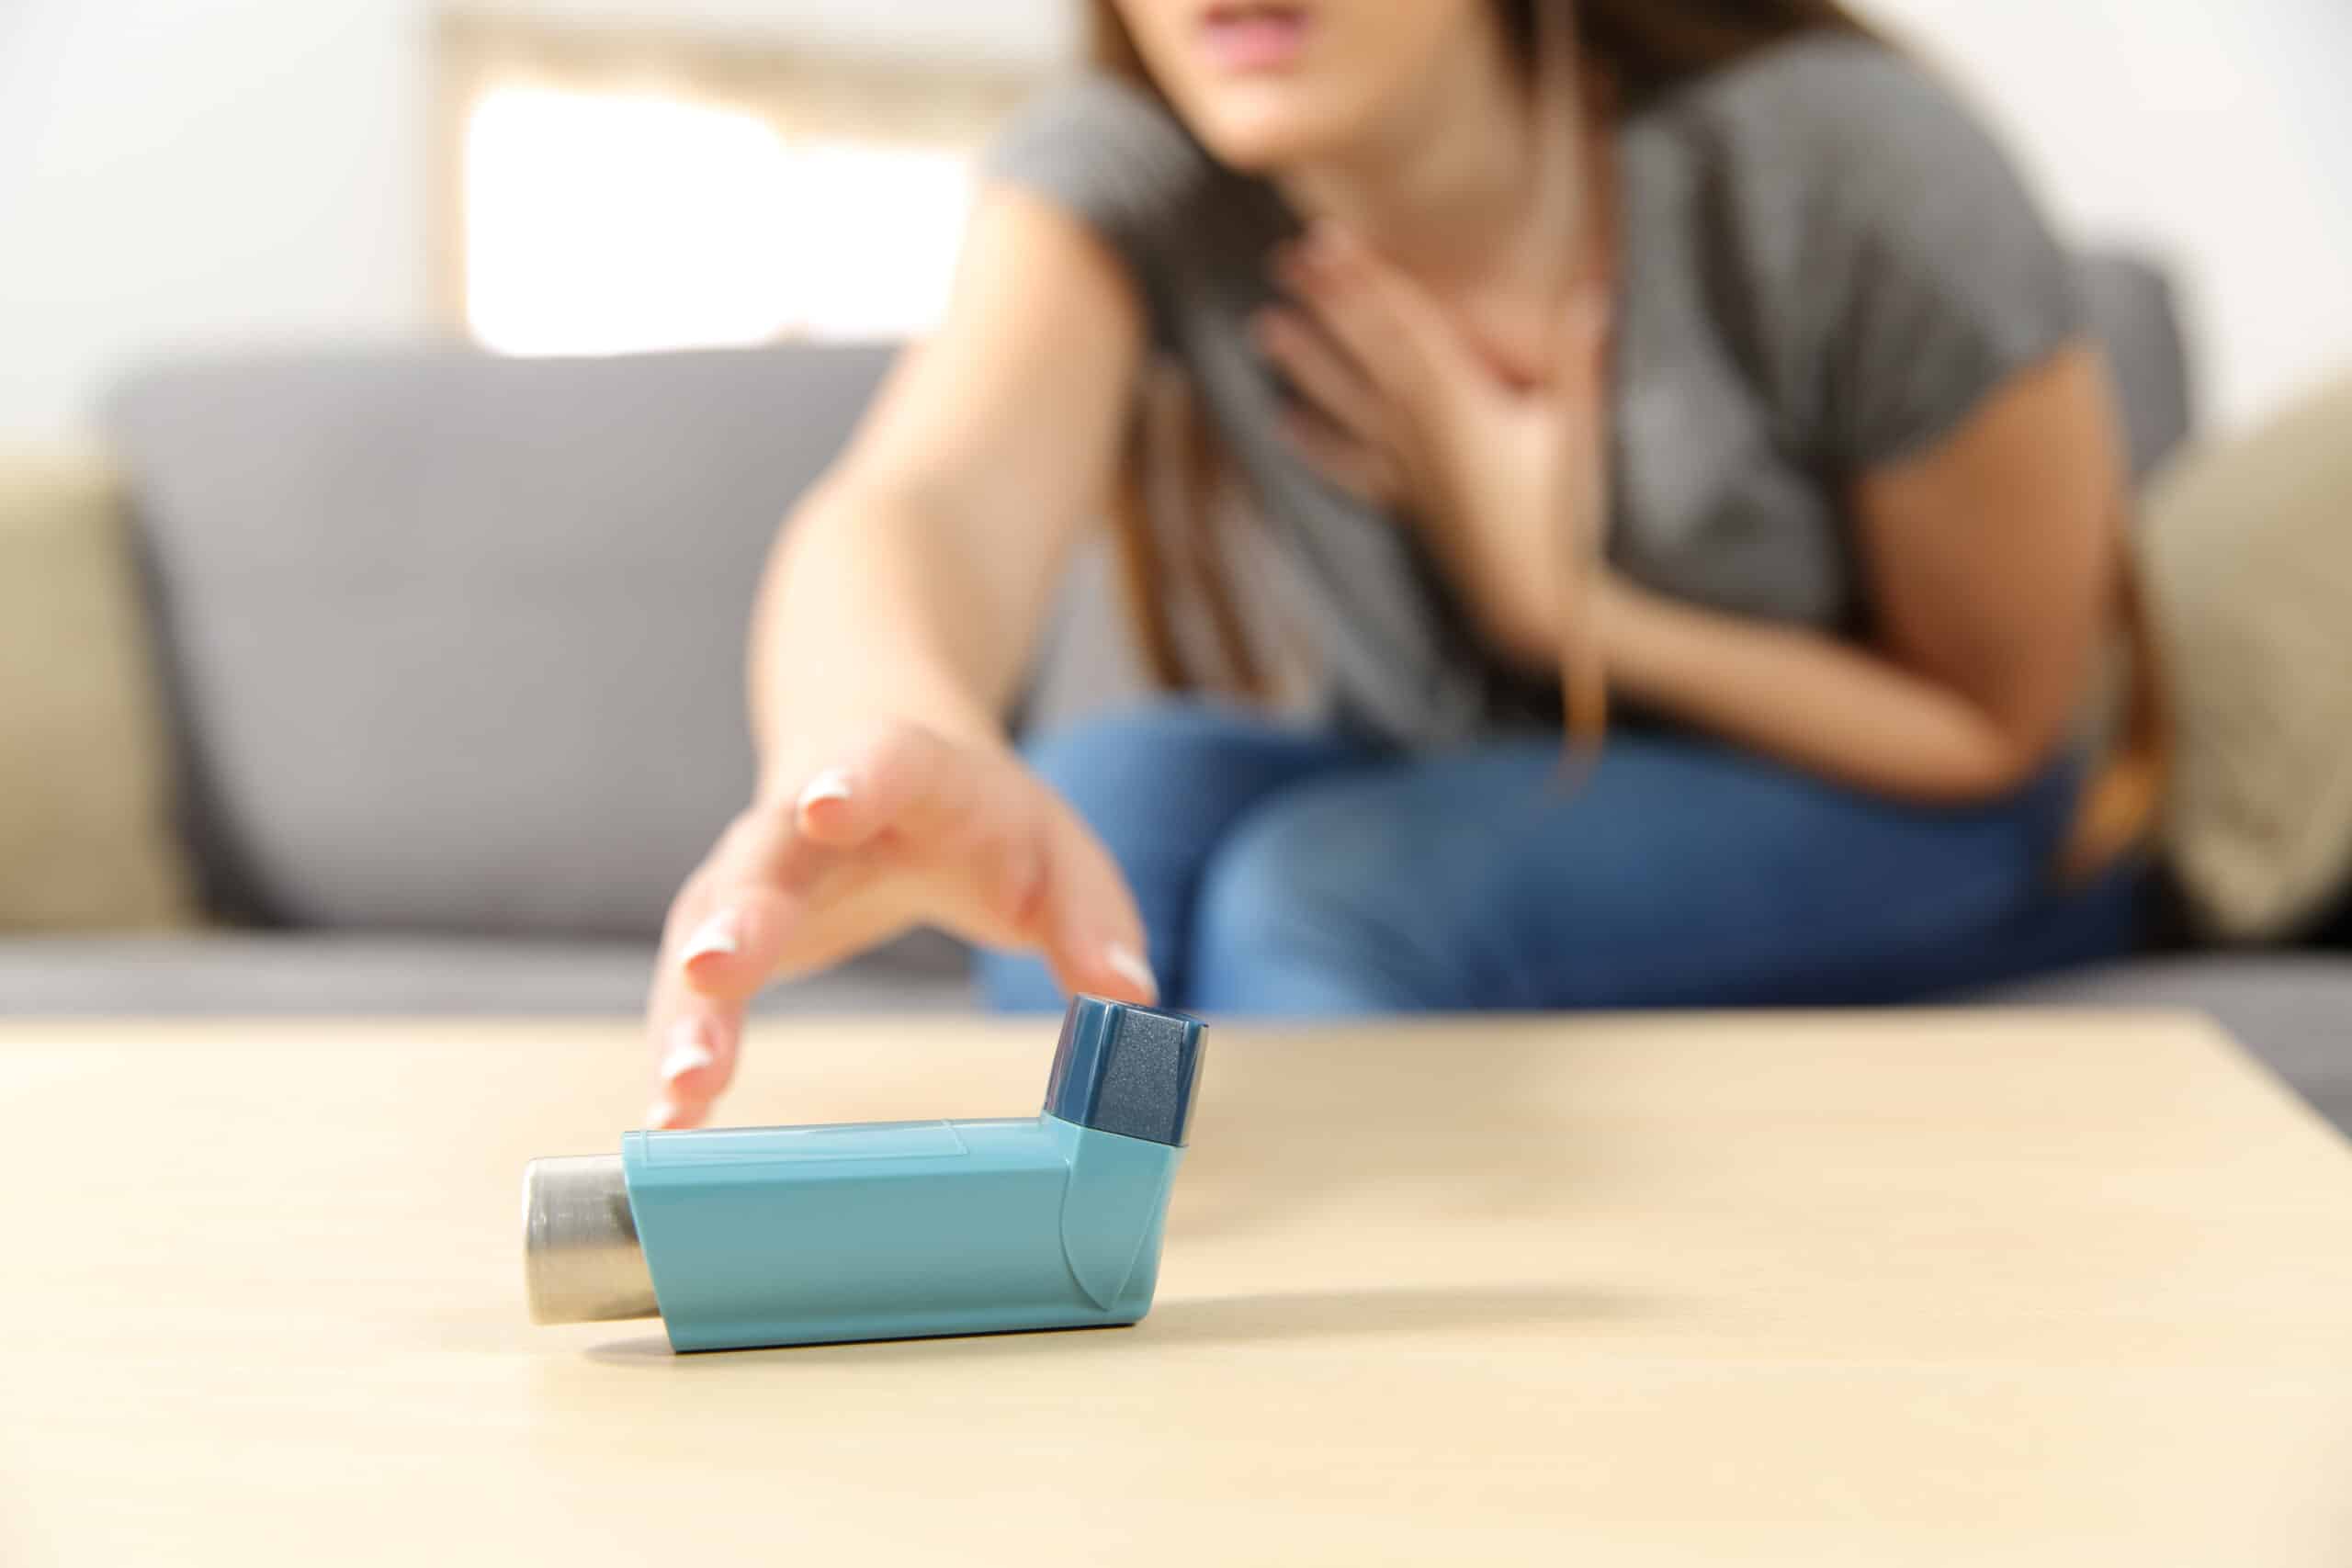 Asthma is a disabling disease that can affect a person’s quality of life and limit daily activities.